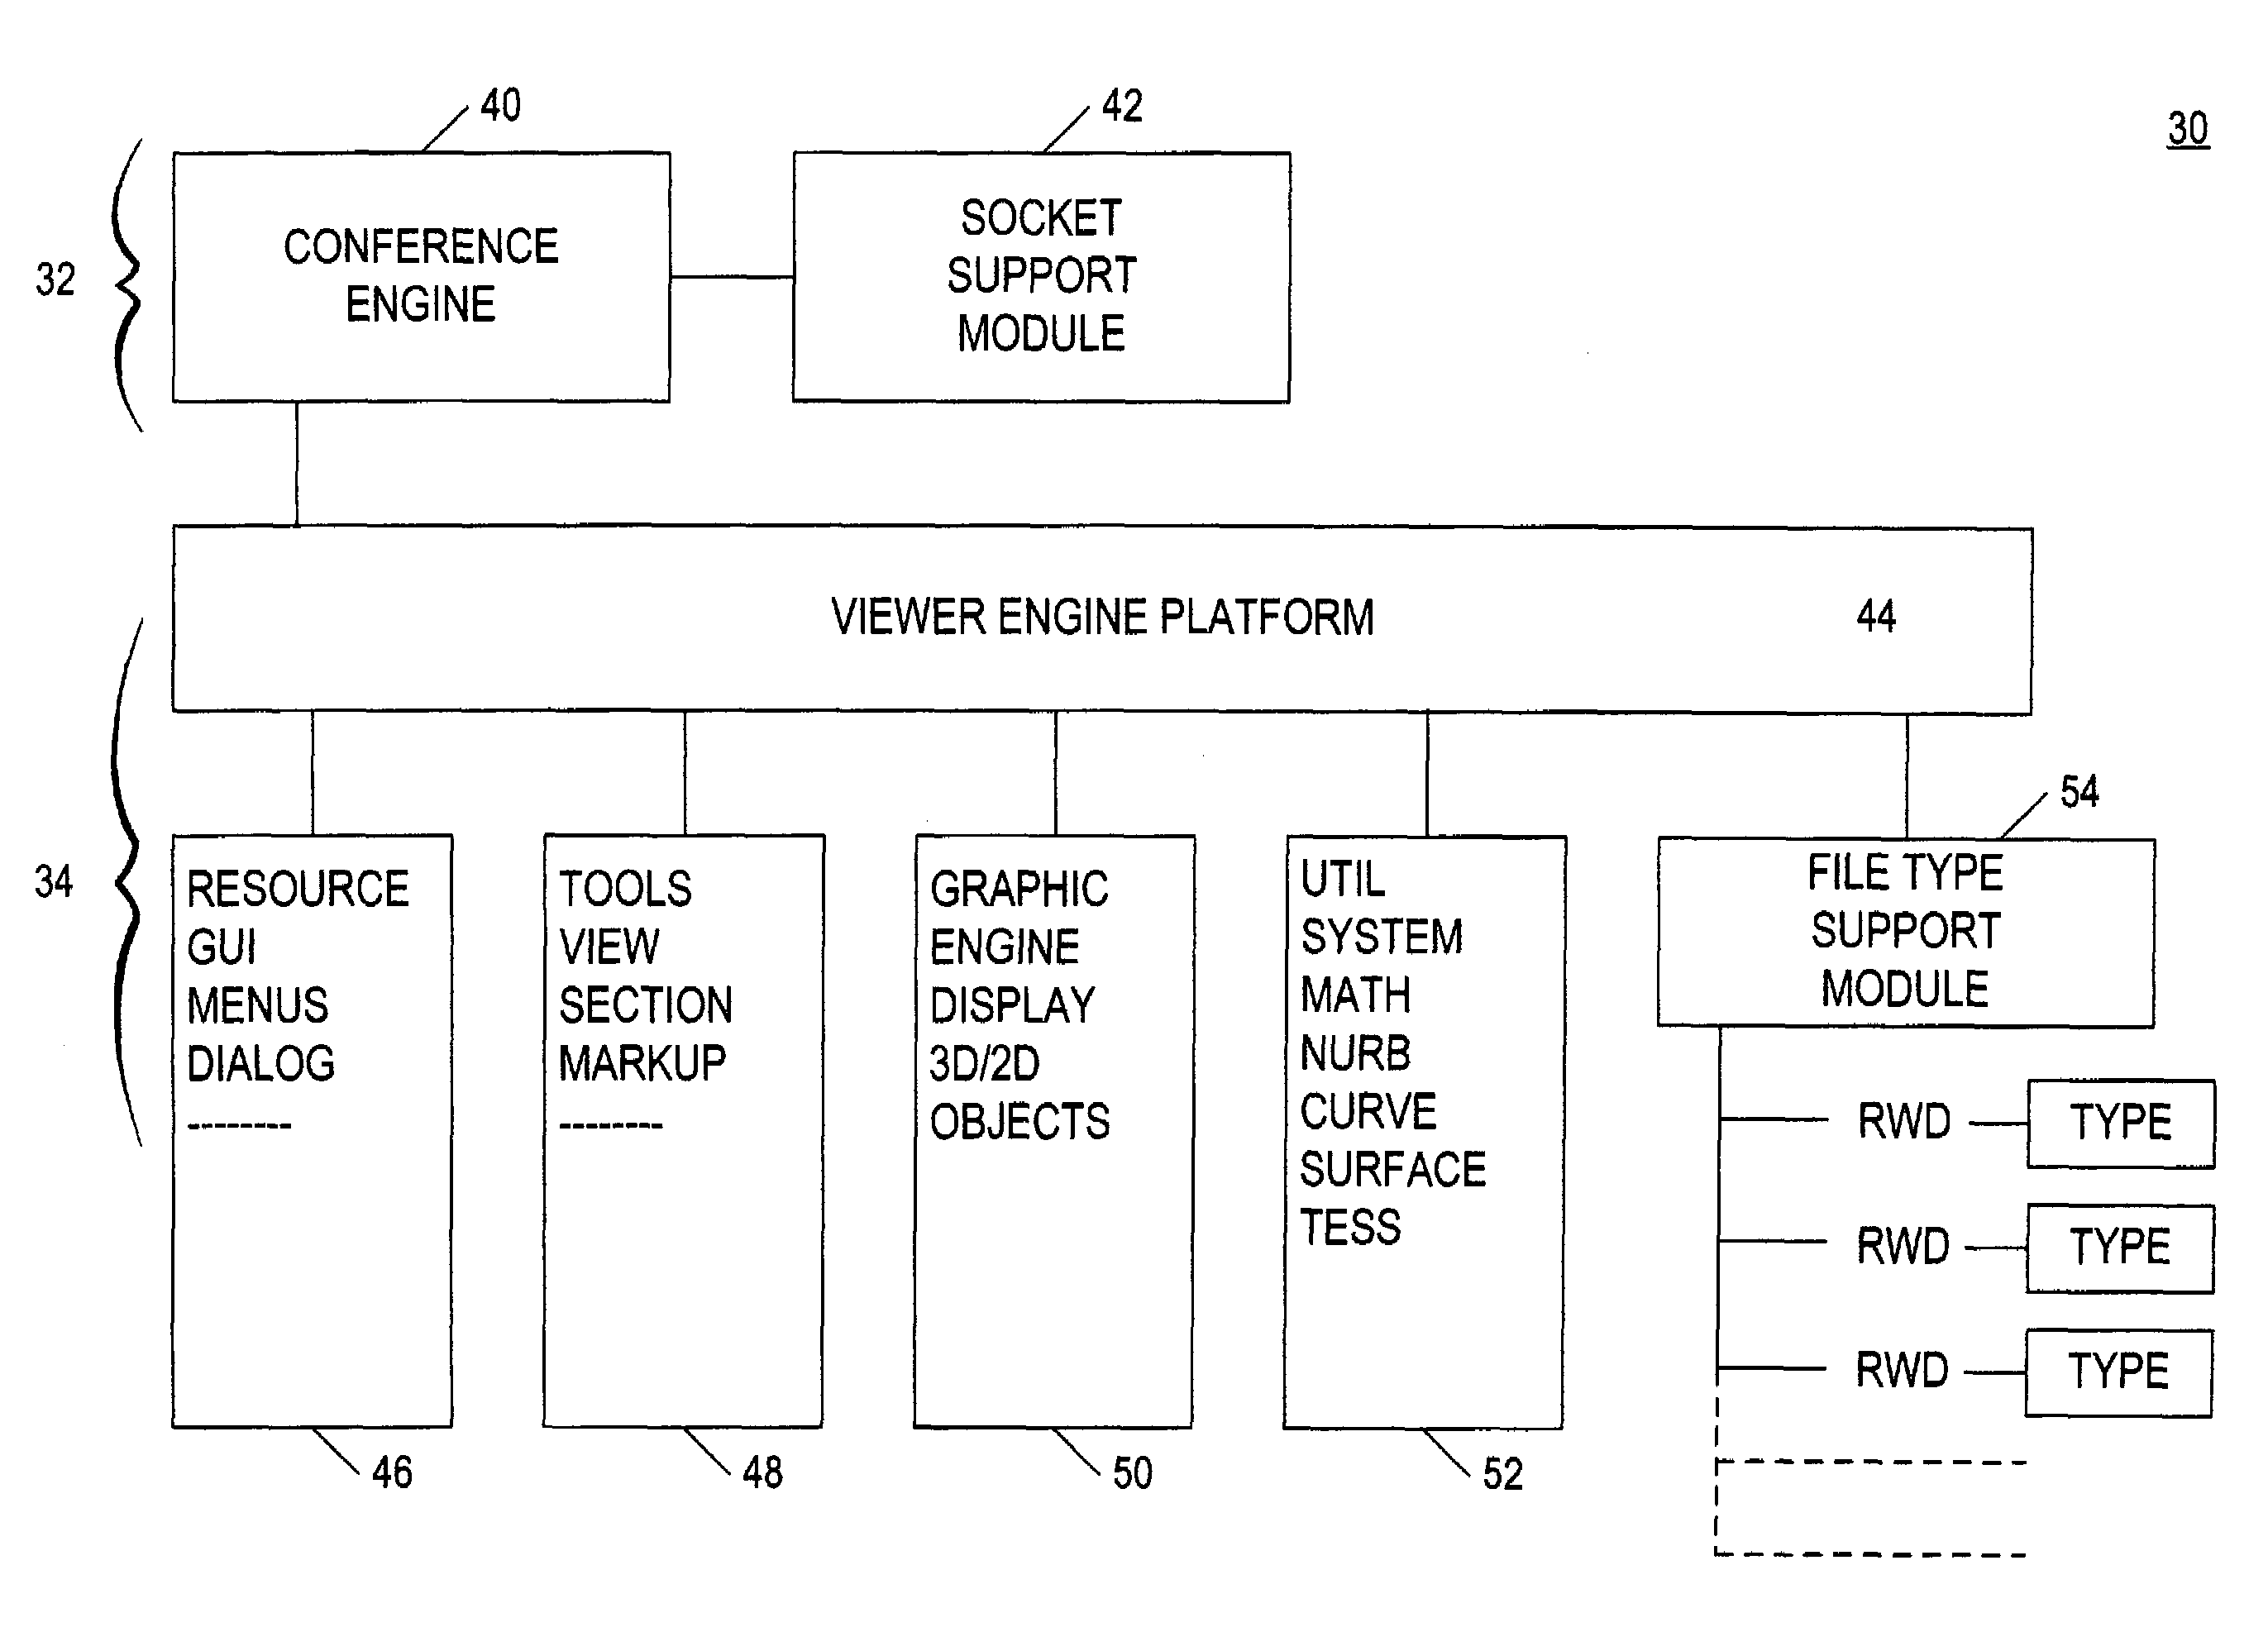 System for electronic file collaboration among multiple users using peer-to-peer network topology